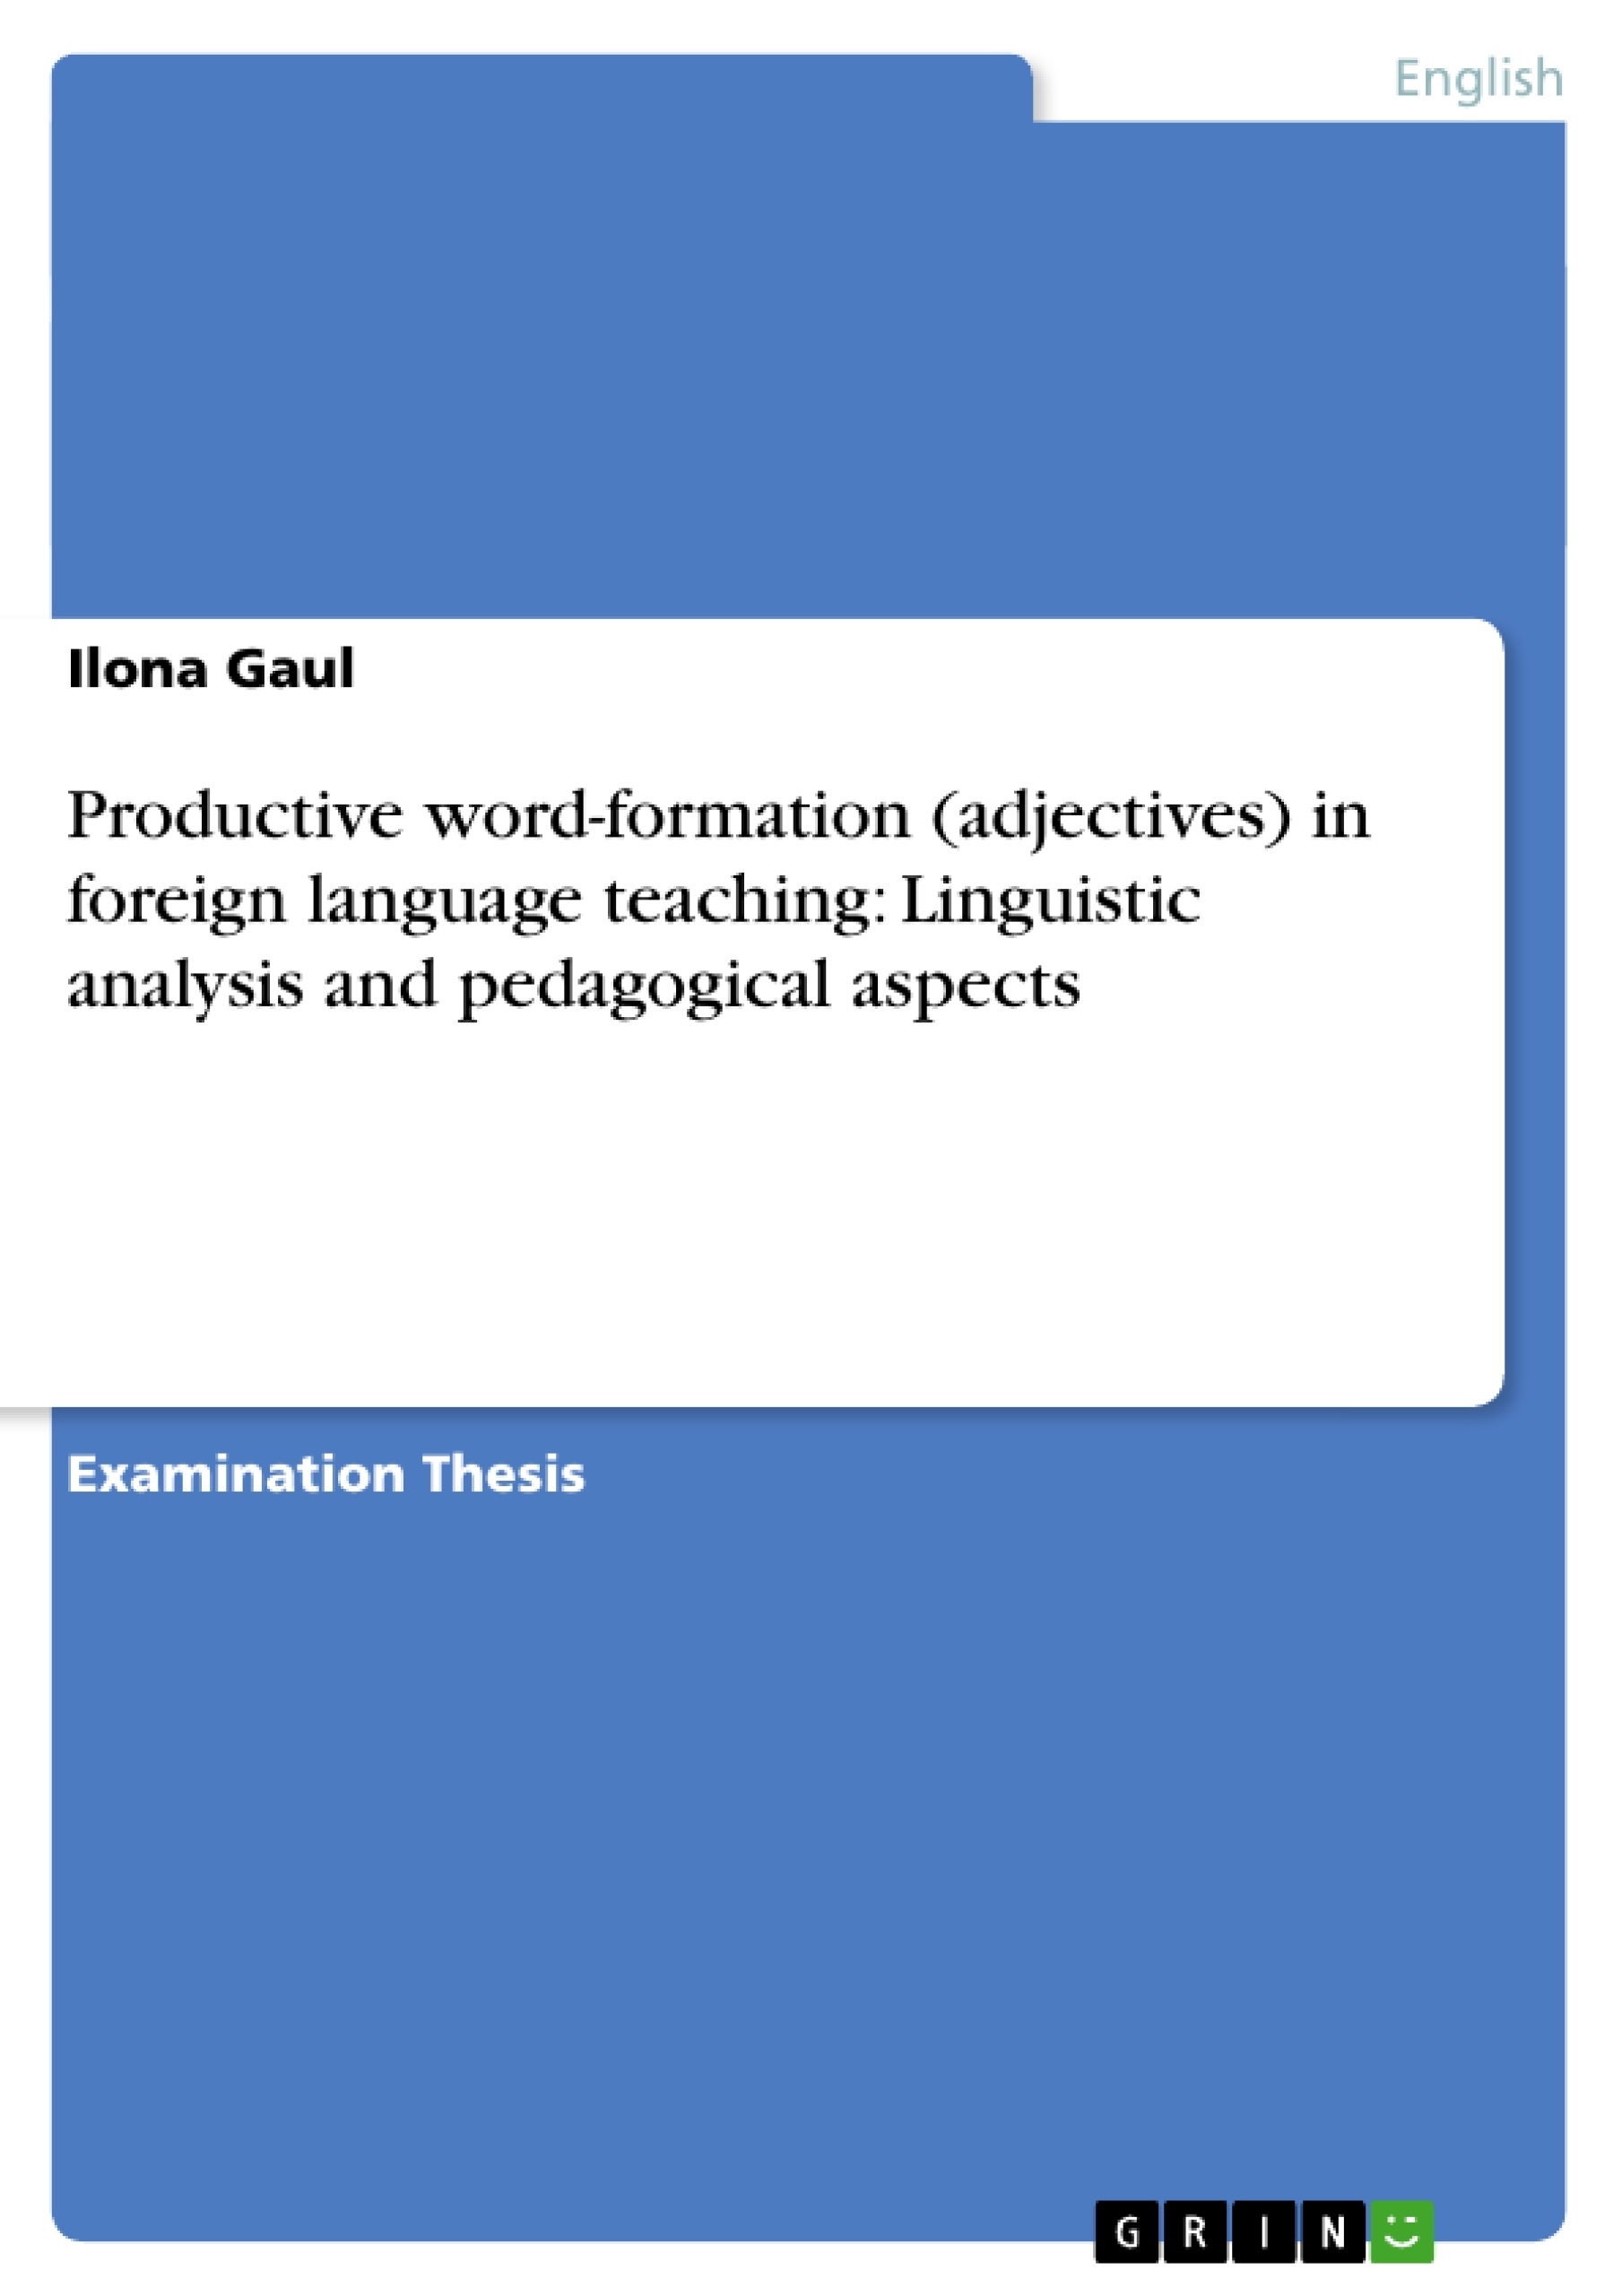 Title: Productive word-formation (adjectives) in foreign language teaching: Linguistic analysis and pedagogical aspects